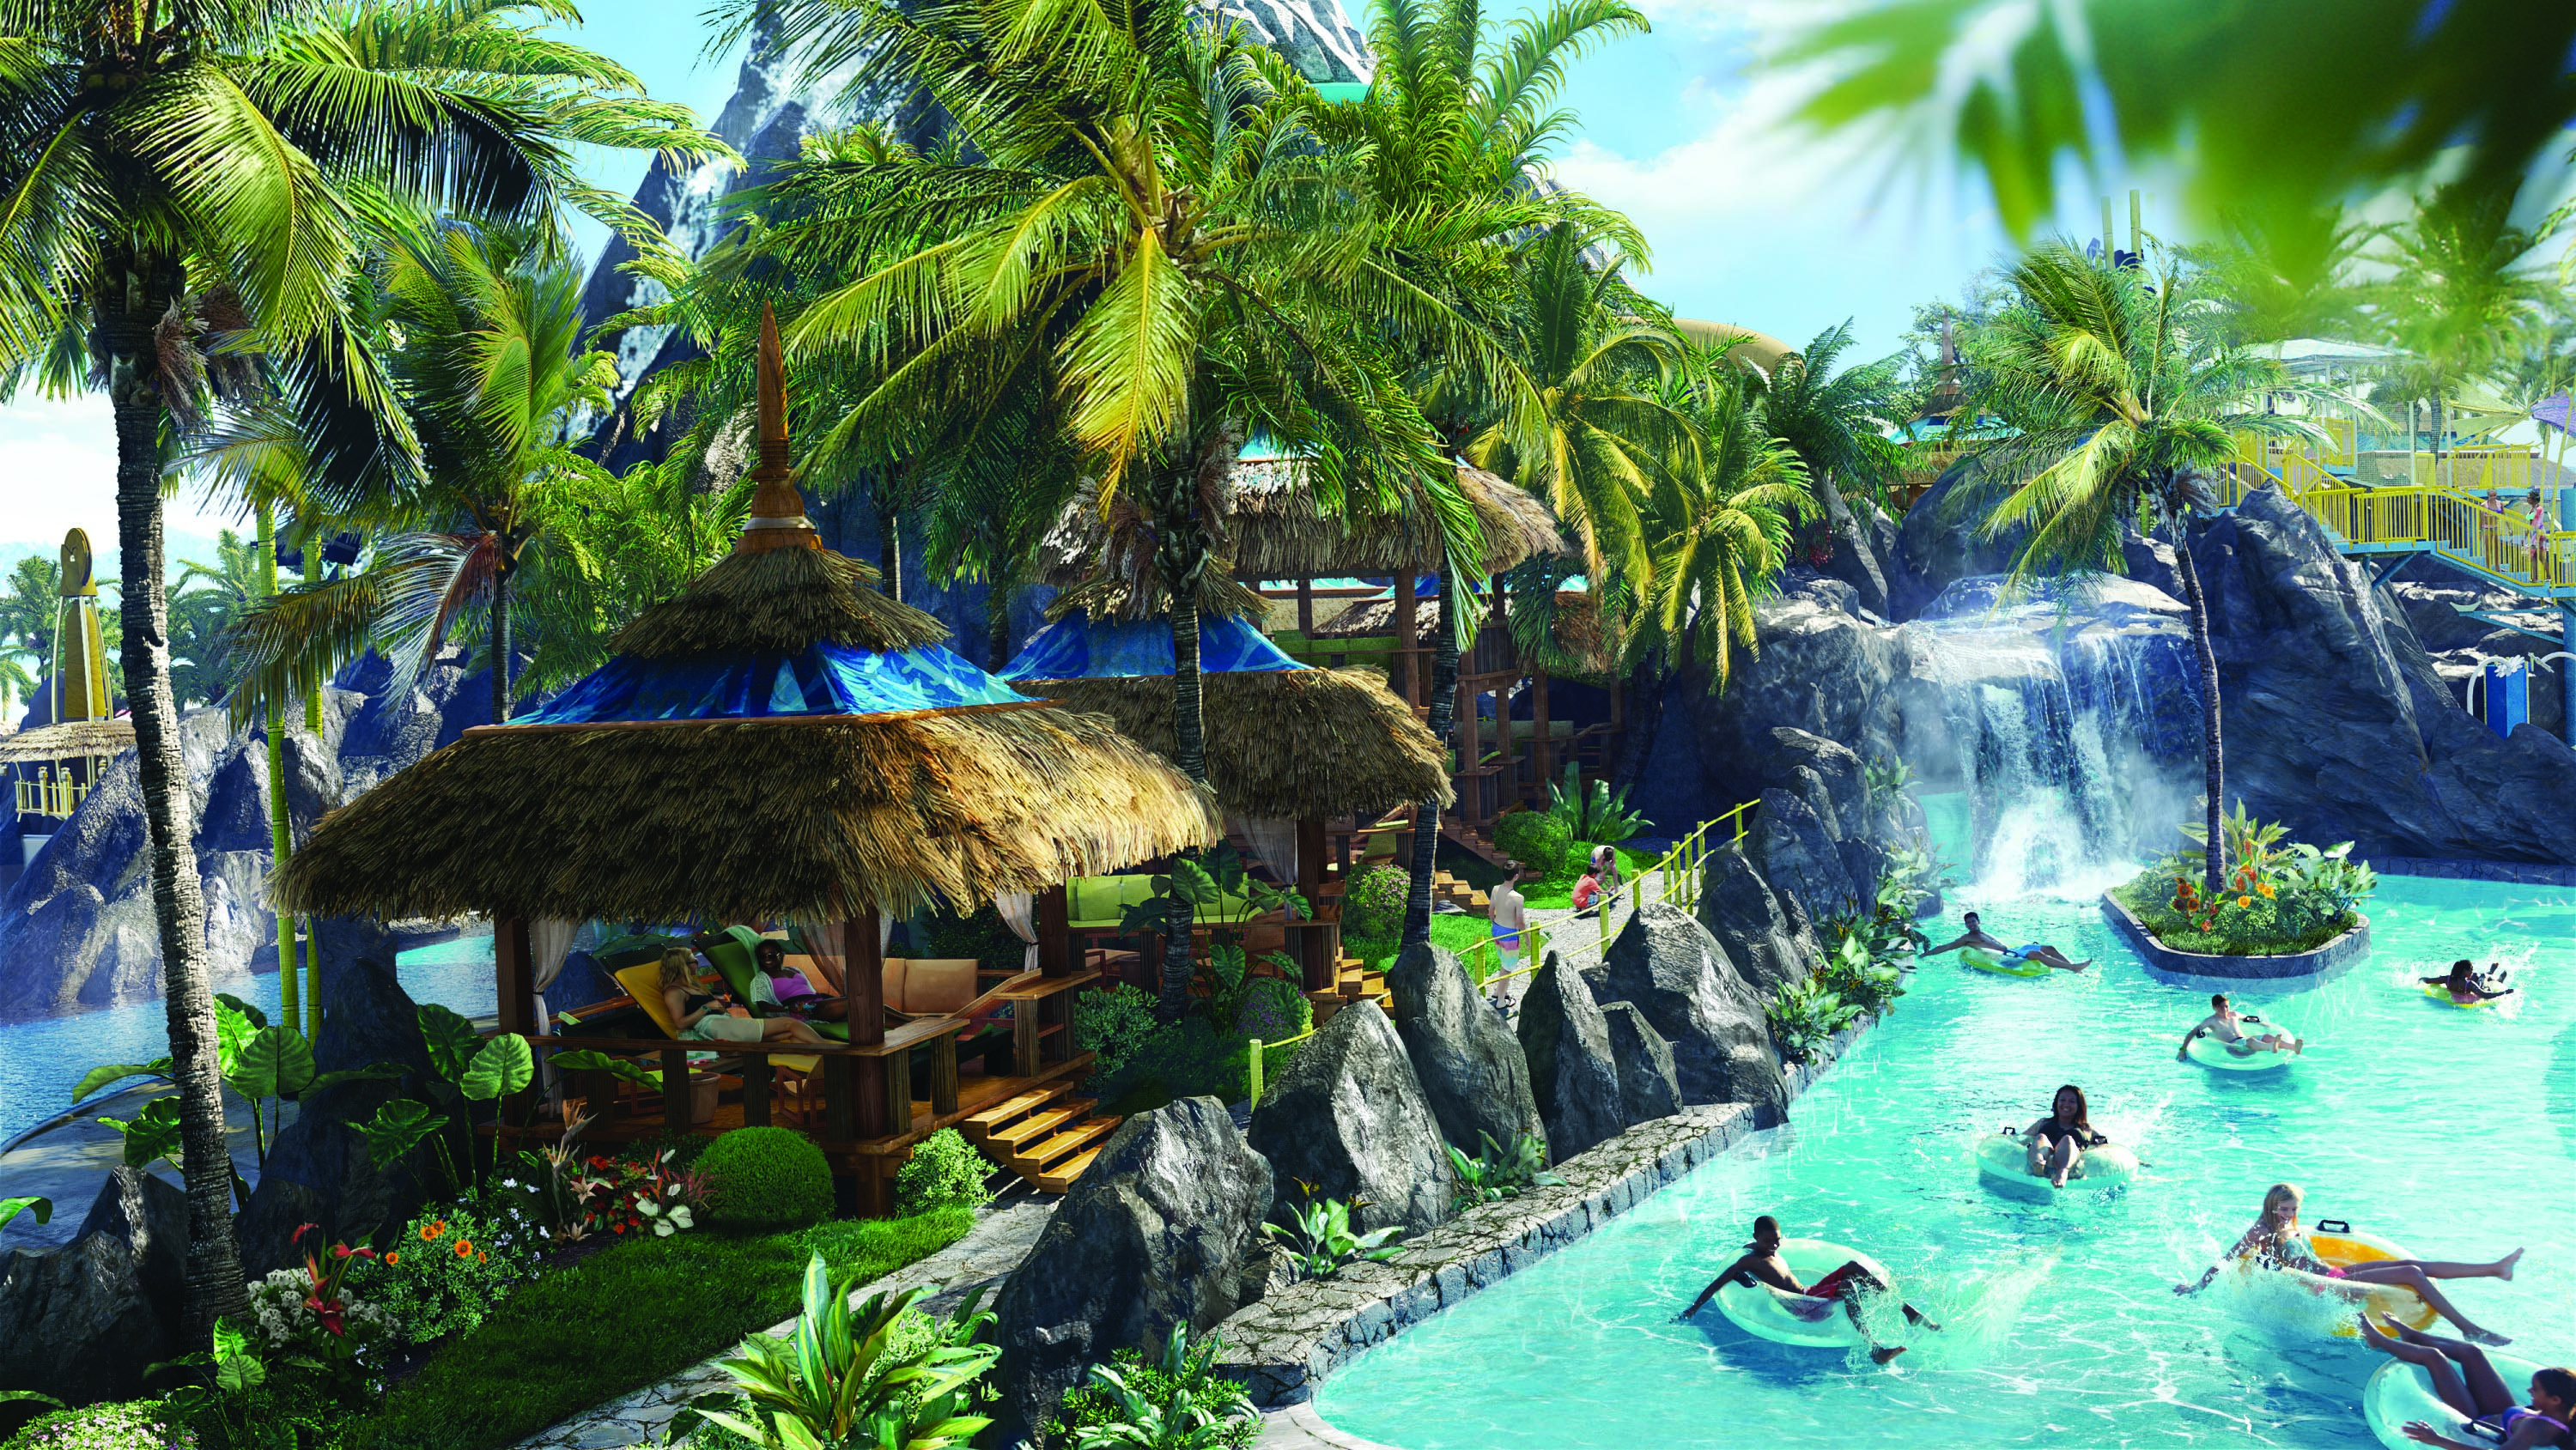 Volcano Bay Details: Premium Seating and Cabanas Take Relaxation to the Next Level